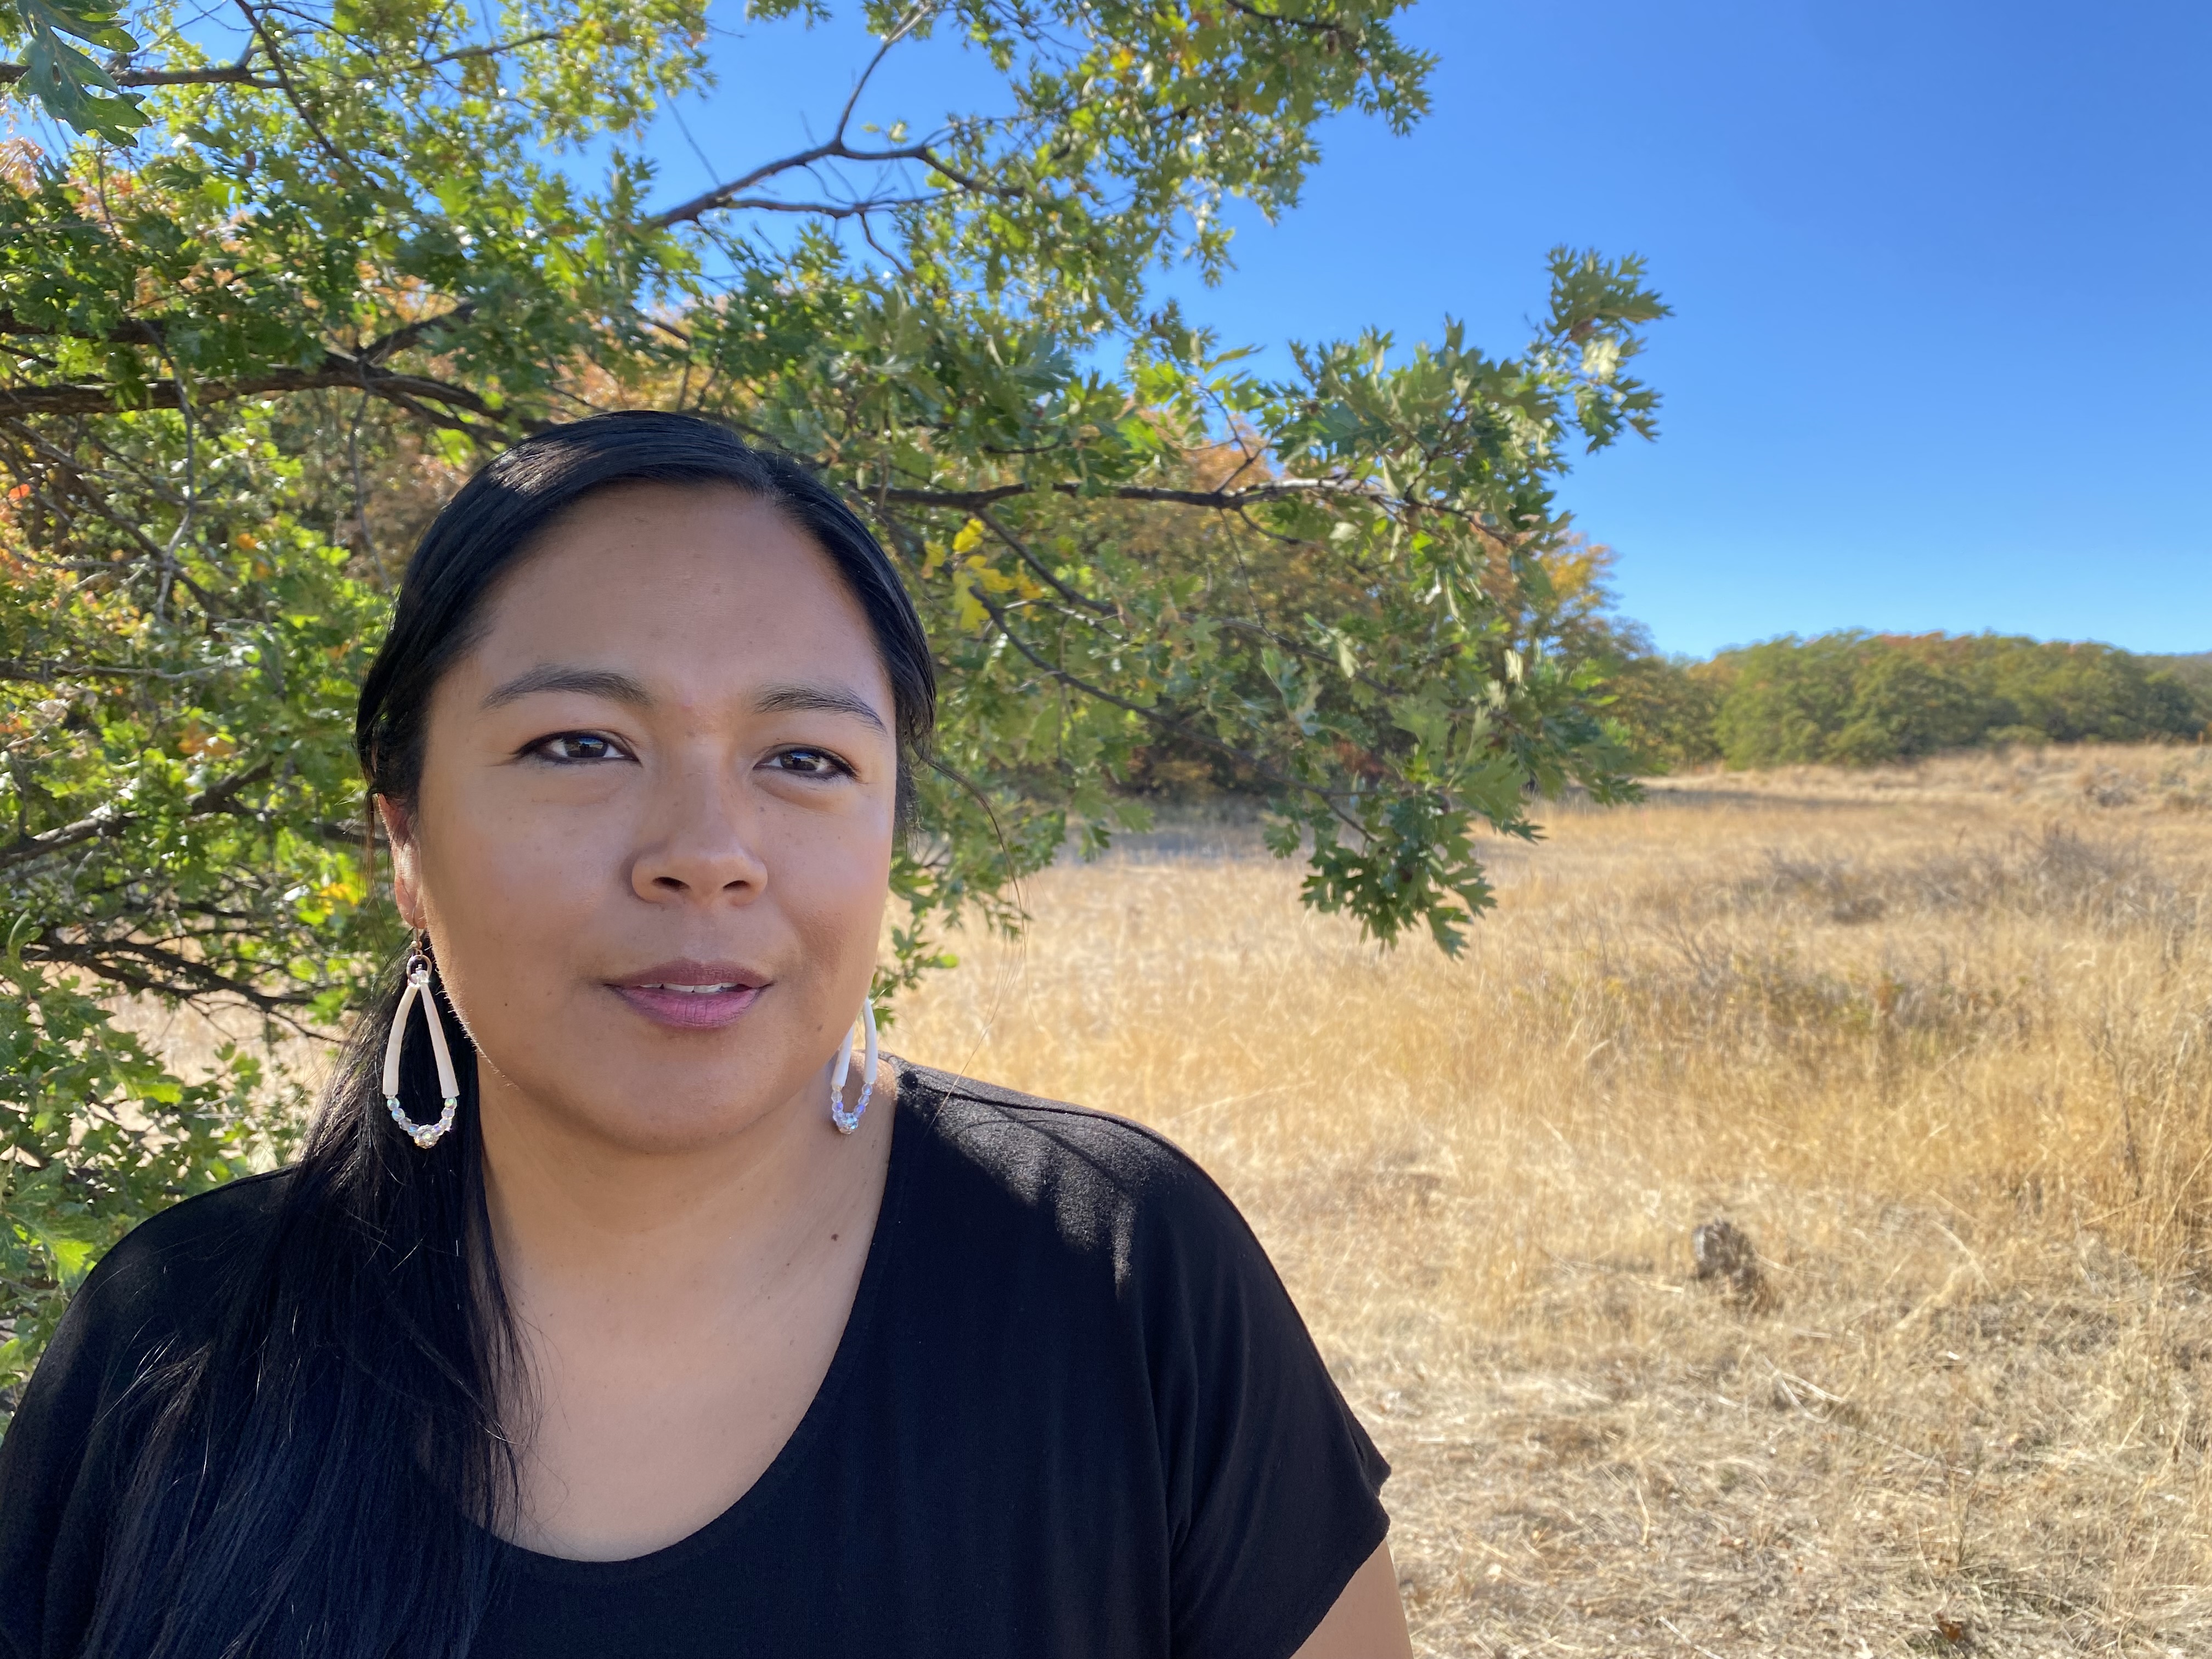 Emily Washines is a member of the Confederated Tribes and Bands of the Yakama Nation and a historian. She said the history of Mool-Mool and Fort Simcoe is complicated and is embedded with deep historical trauma. To protect herself she uses wild rosewater after being at sites like cemeteries.